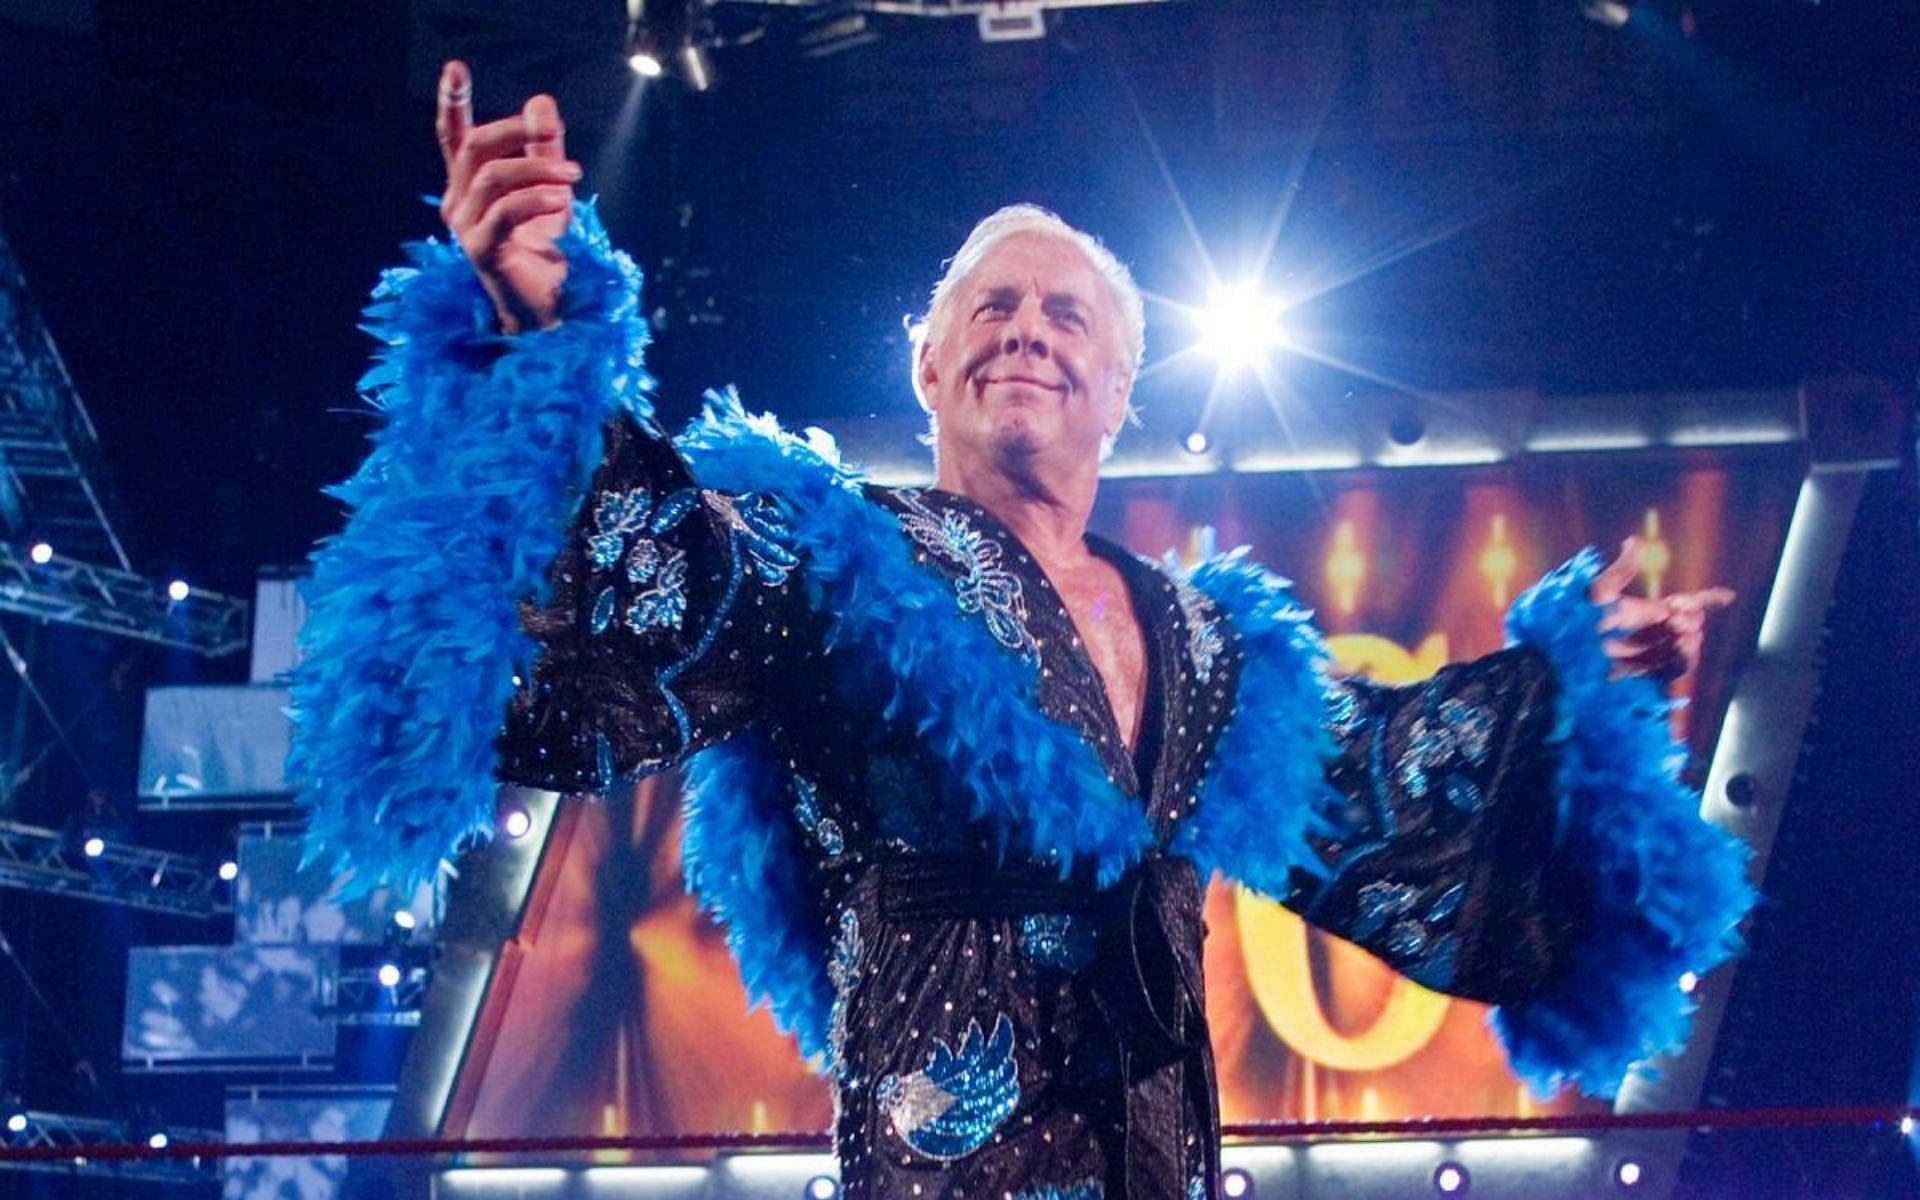 Ric Flair wrestled his last match for WWE at WrestleMania 24